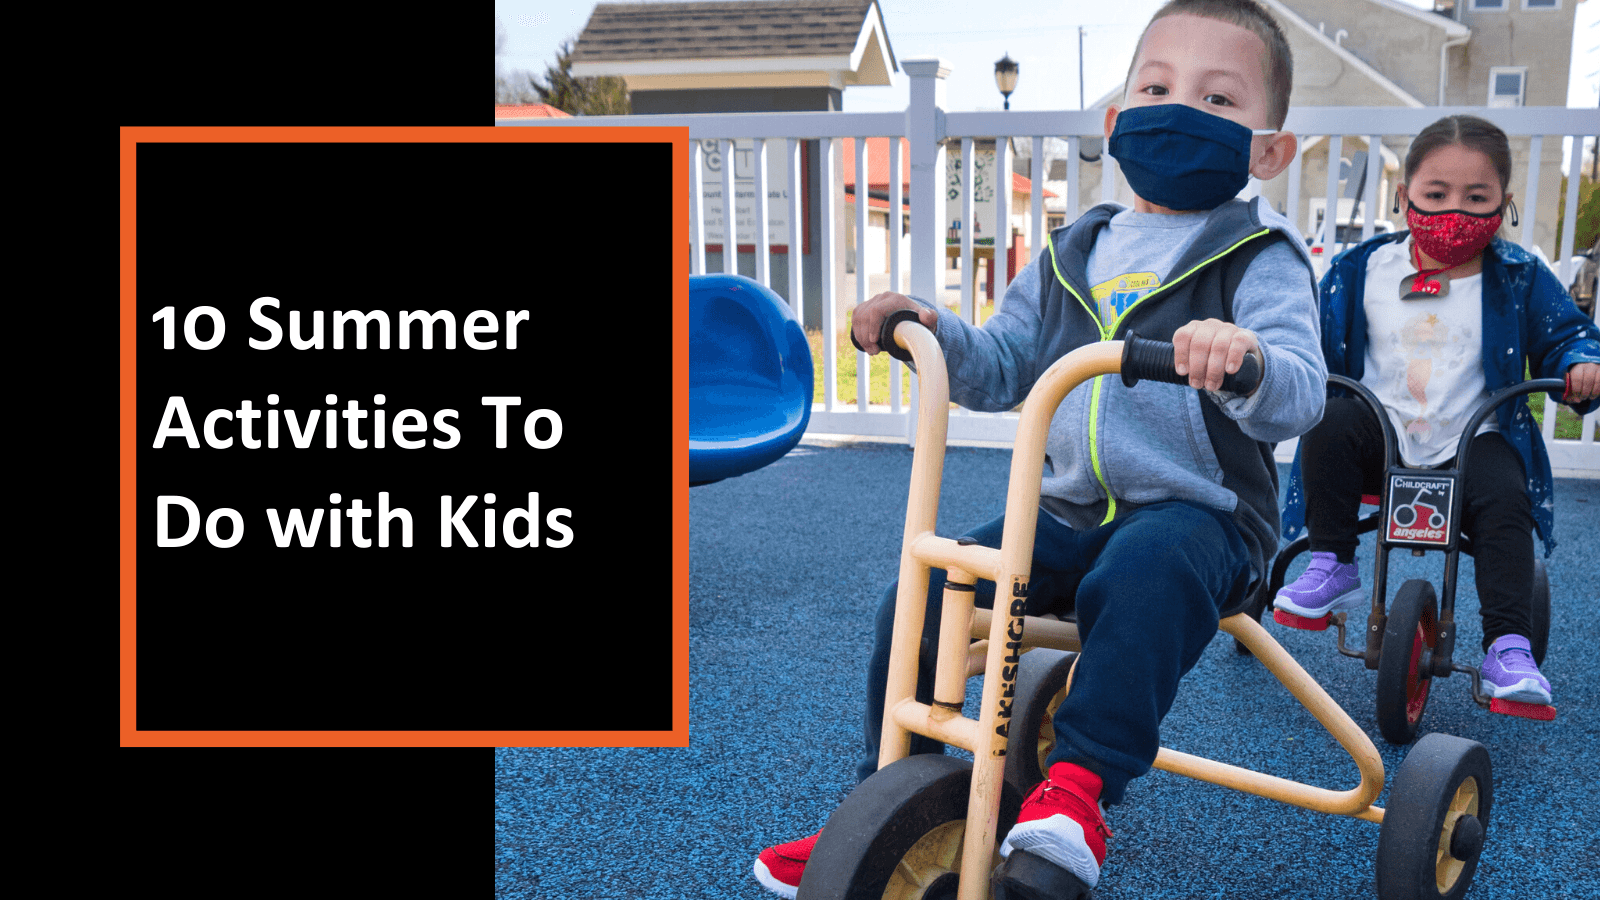 10 Summer Activities To Do With Kids